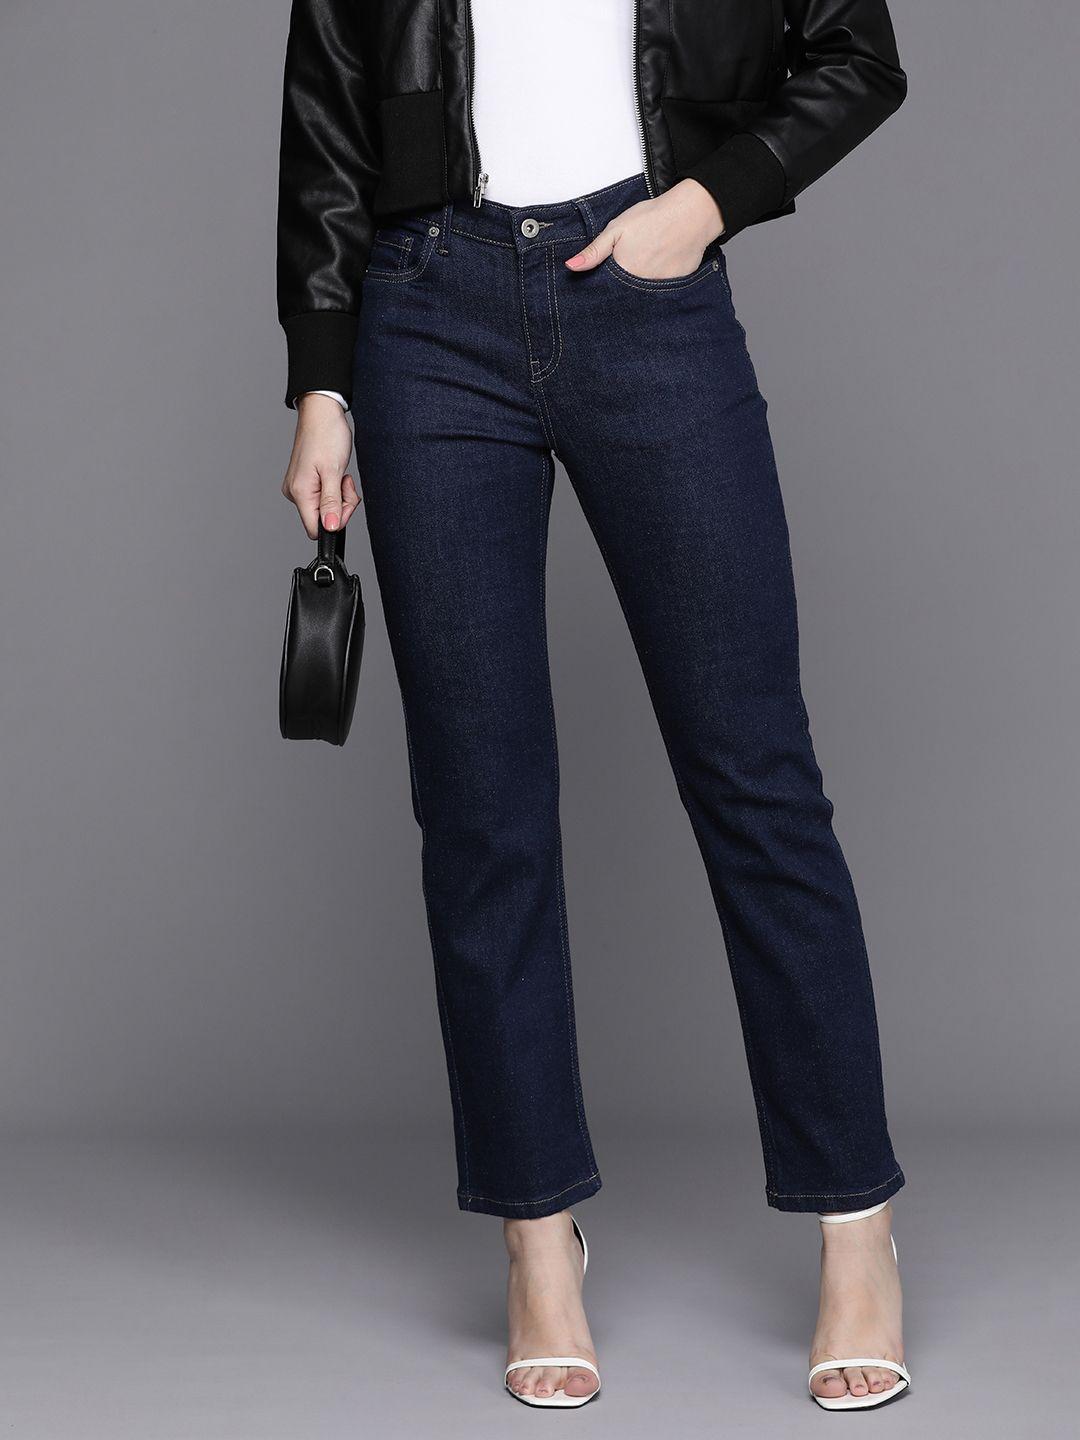 kenneth-cole-women-skinny-fit-stretchable-jeans